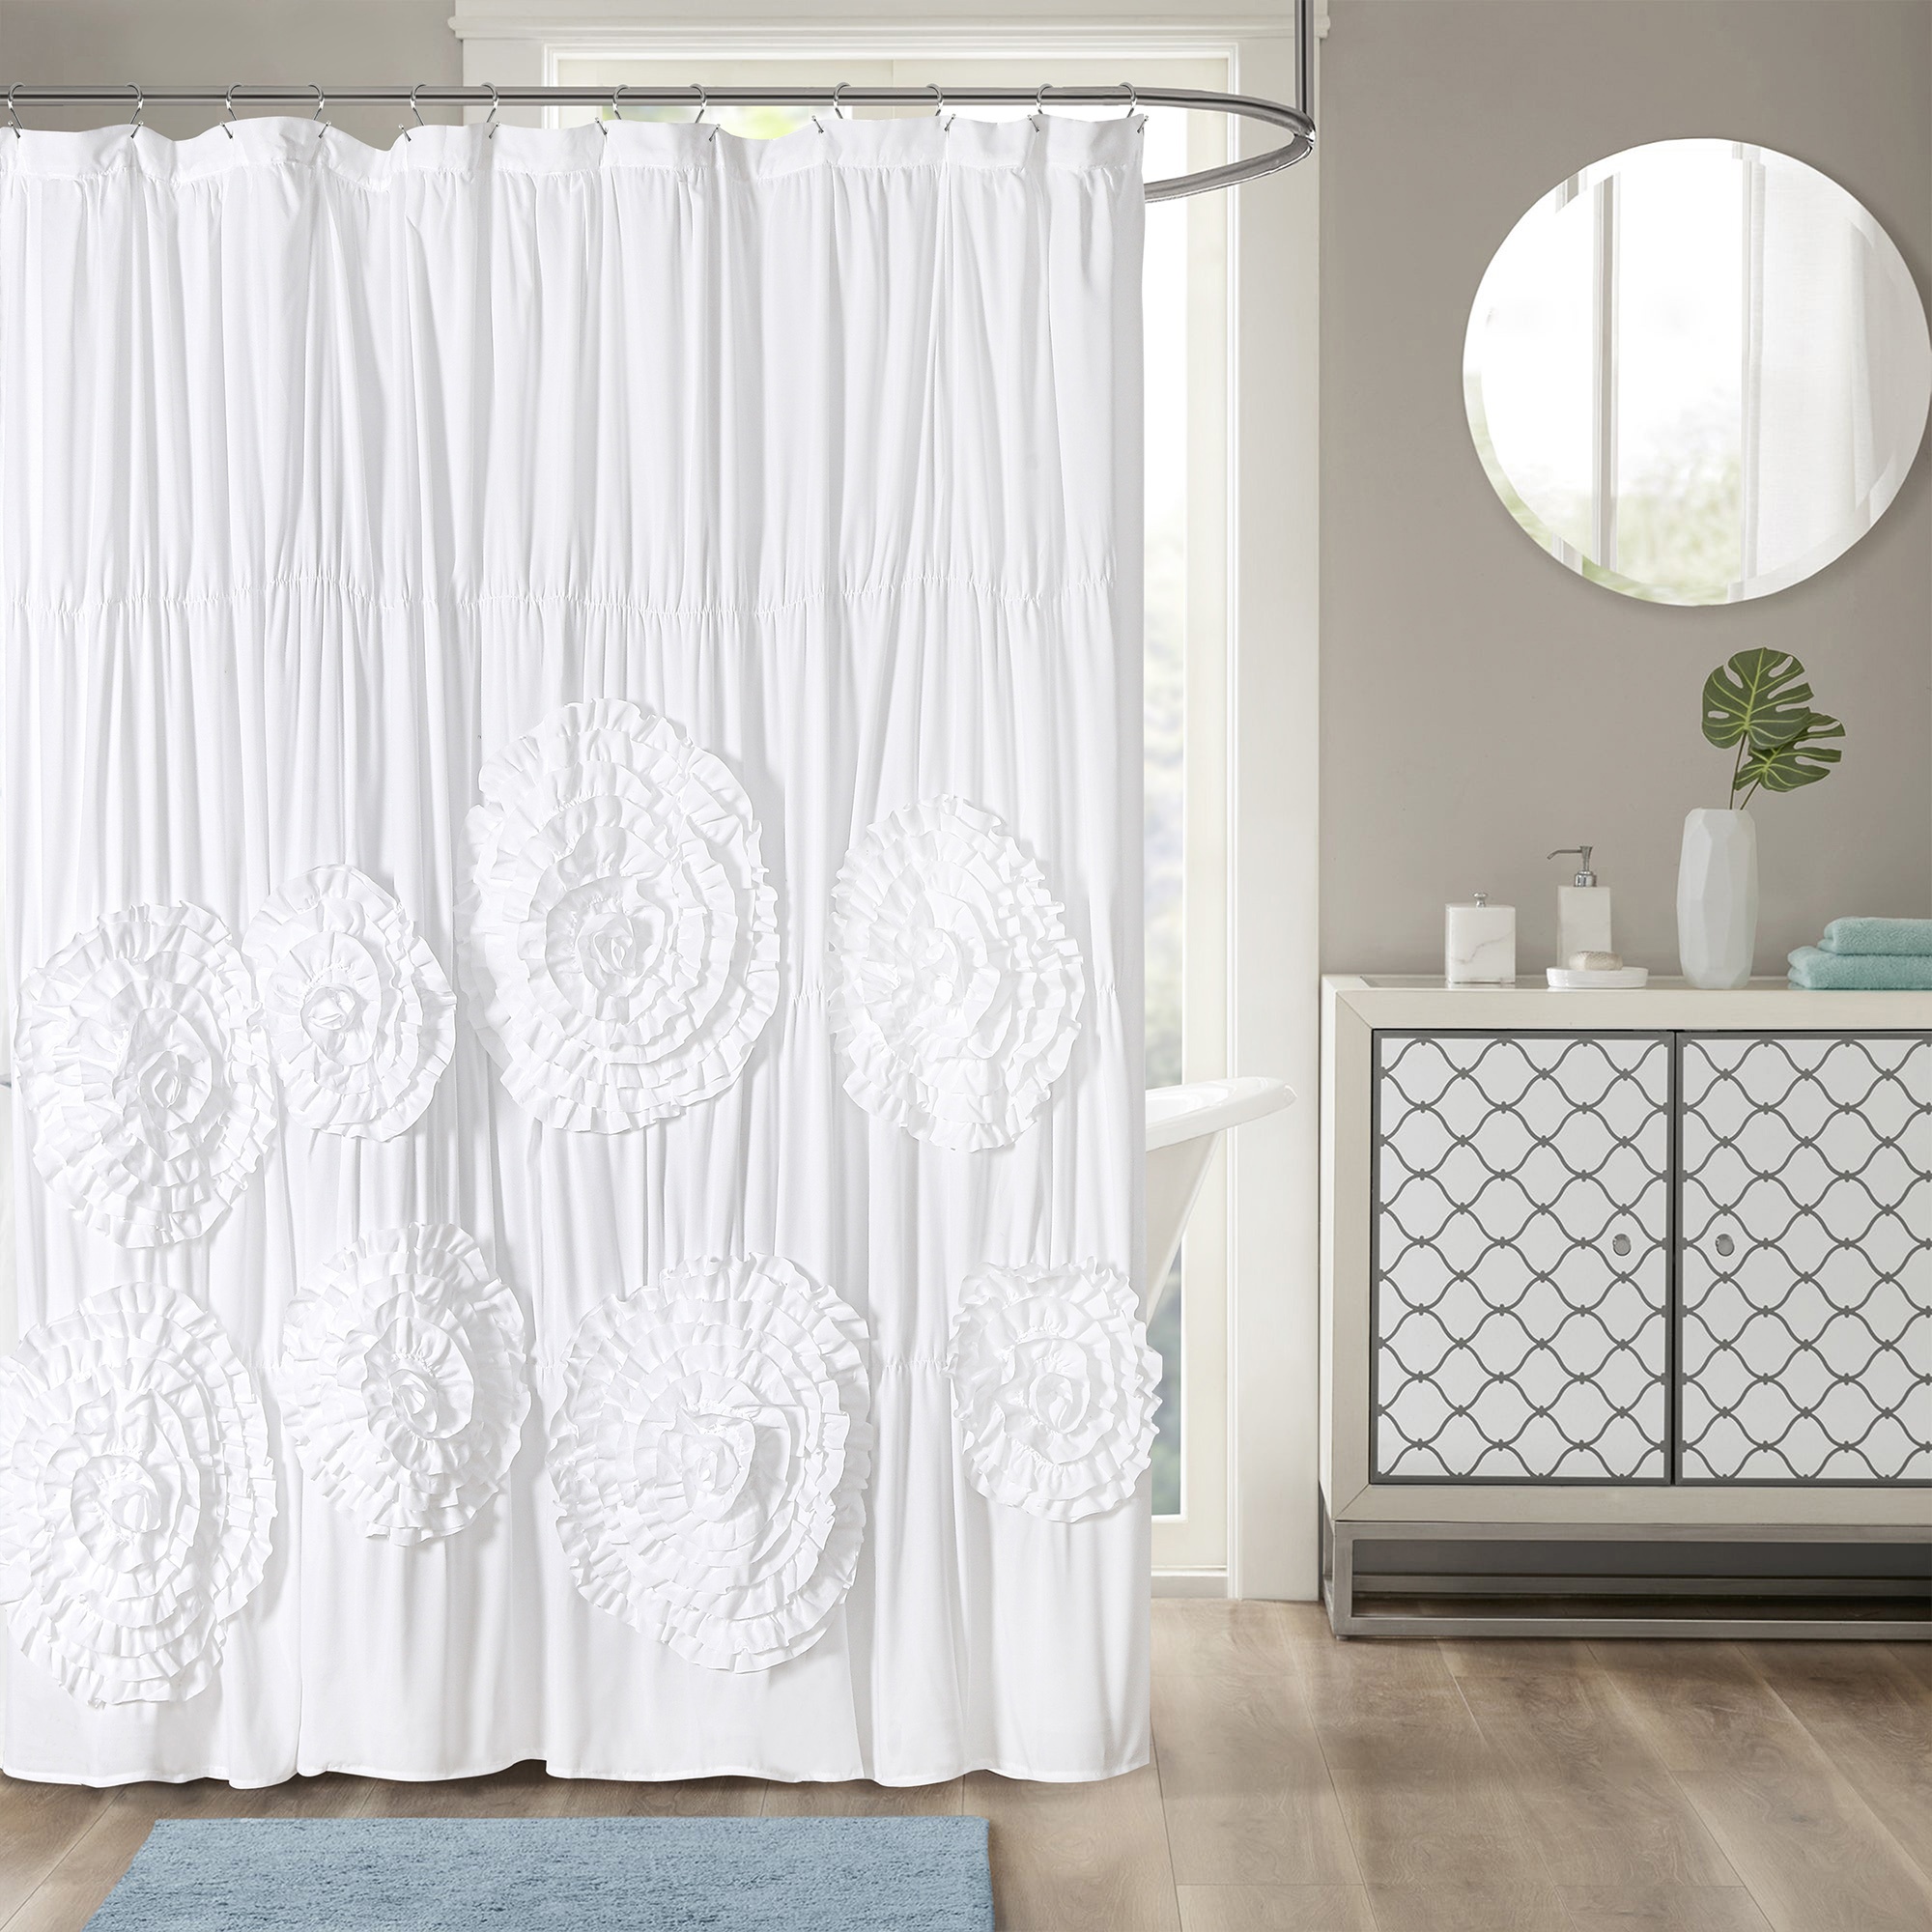 

Farmhouse Ruffle Shower Curtain With Handmade 3d Flowers, Vintage Ruched Fabric Shower Curtains For Bathroom, Decorative Luxury Bathroom Curtain With 12 Holes, White, 72" X 72